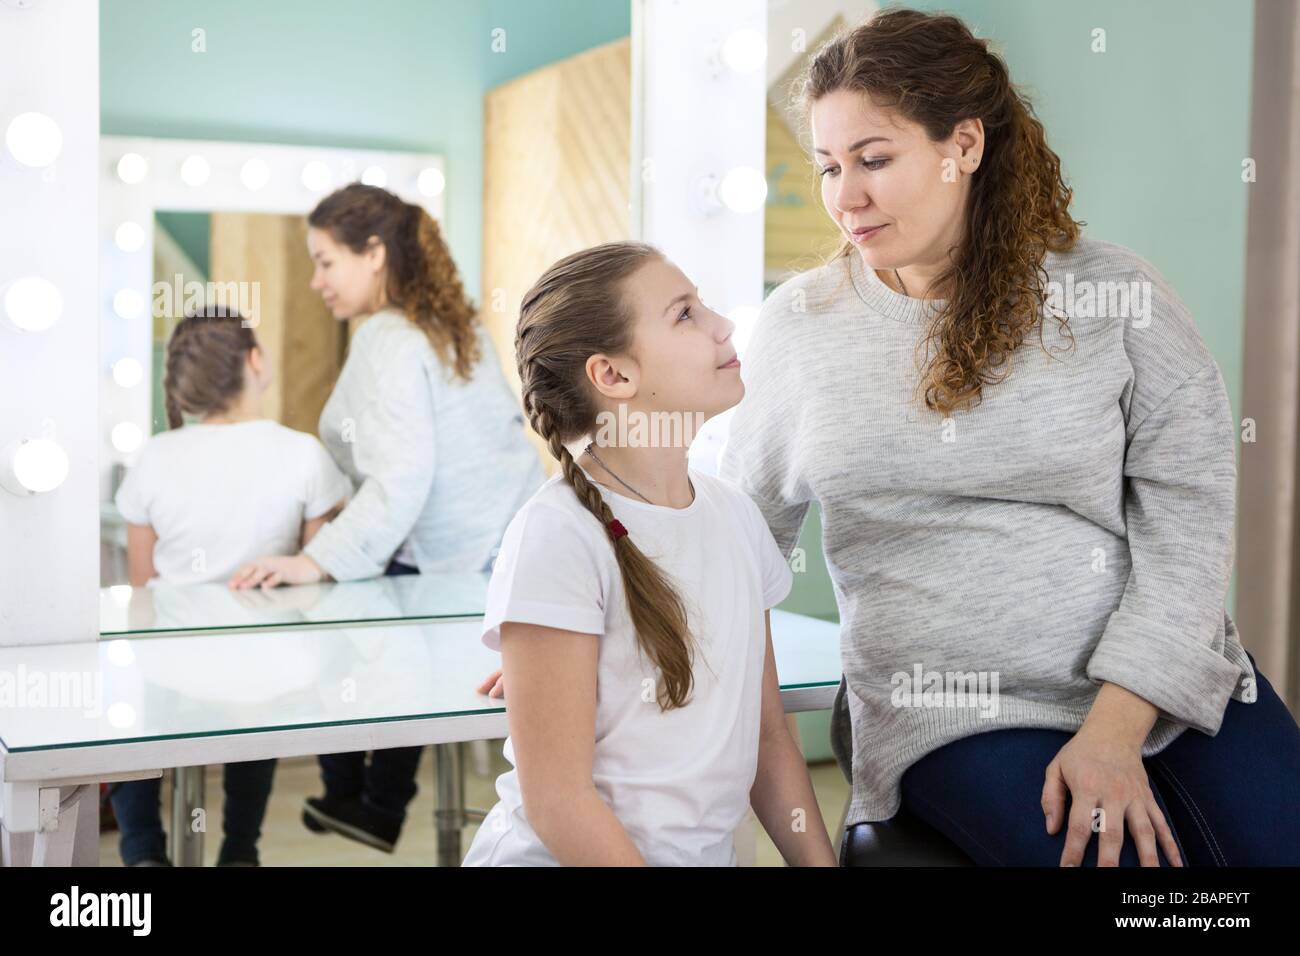 Mother brought her daughter to the casting of actors, waiting their turn in dressing room, looking each other Stock Photo